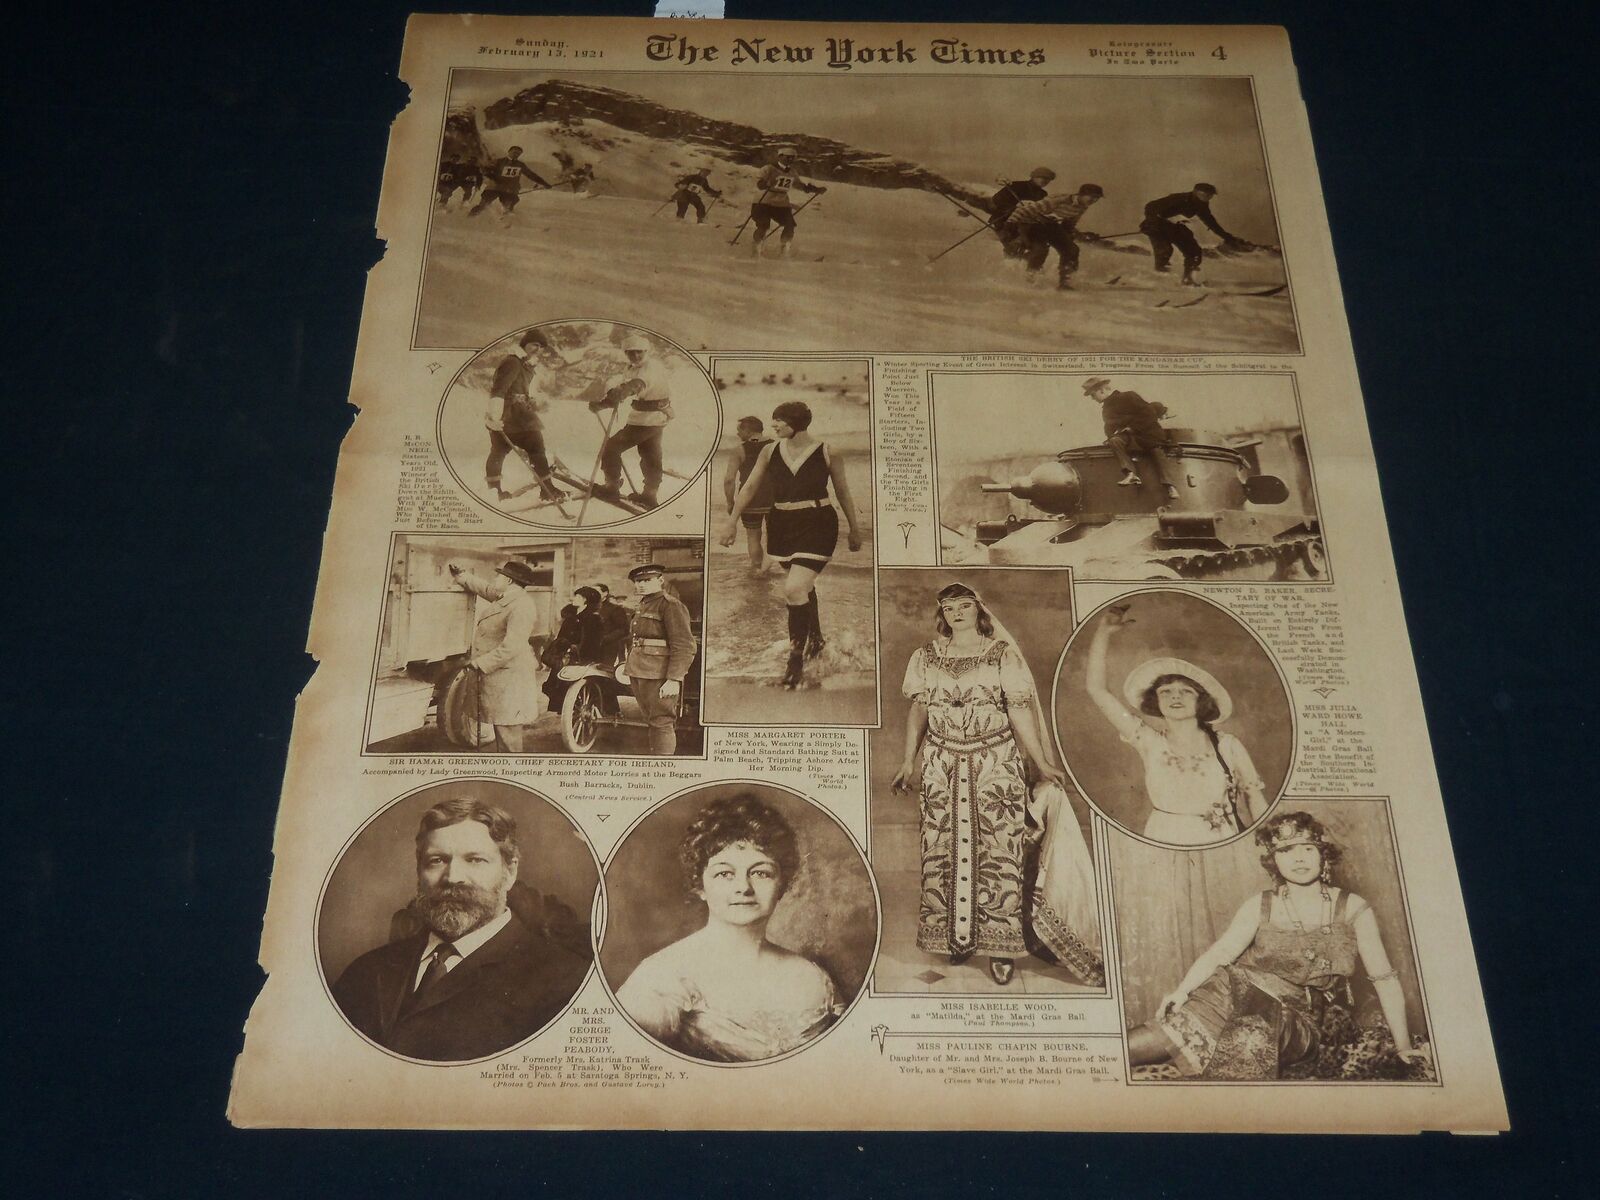 1921 FEBRUARY 13 NEW YORK TIMES PICTURE SECTION NO. 4 & 5 - BABE RUTH - NT 8921